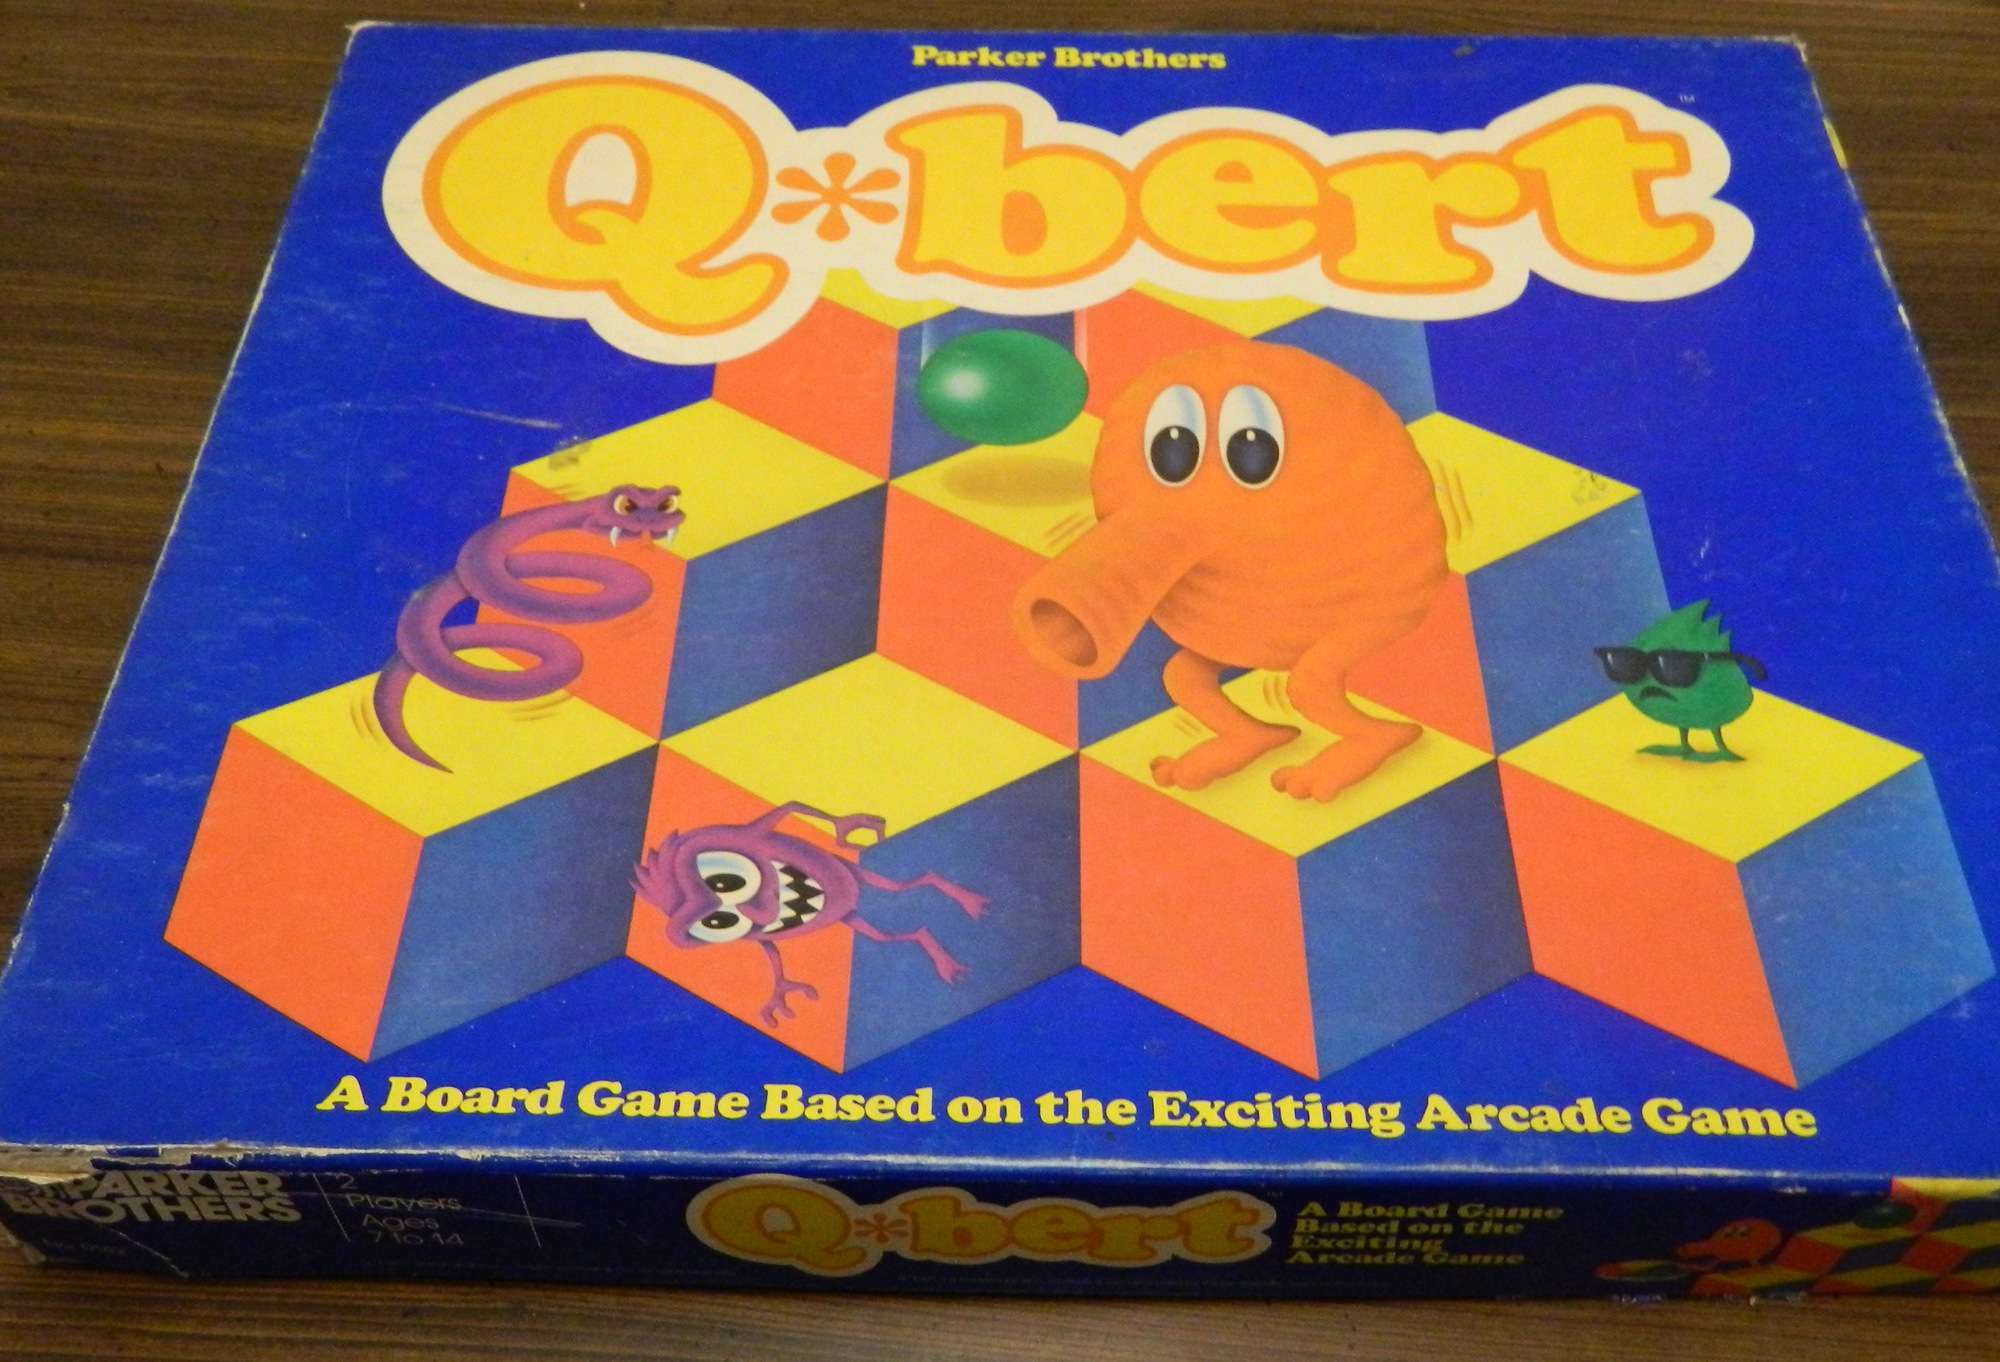 Q*bert Board Game Review and Instructions